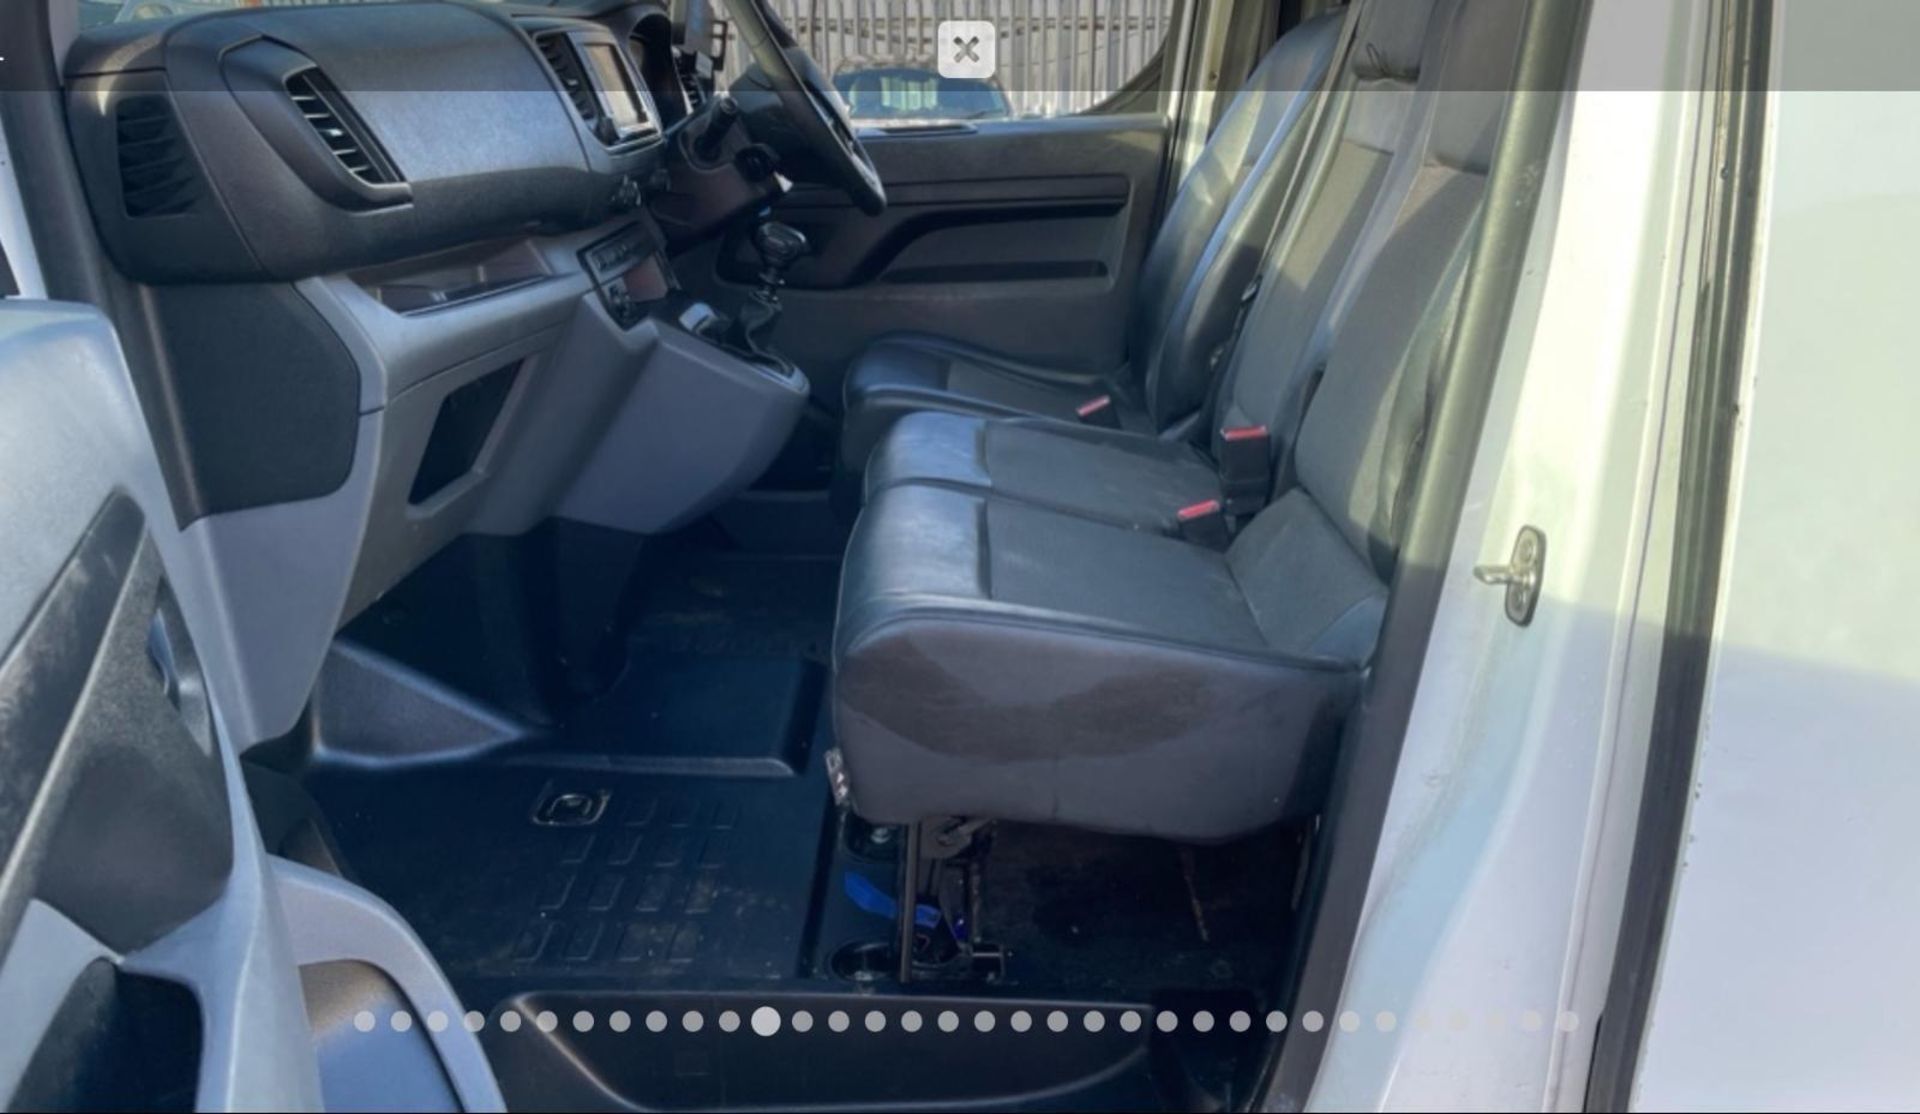 2019 CITROEN DISPATCH -117K MILES- HPI CLEAR - READY FOR WORK ! - Image 9 of 12